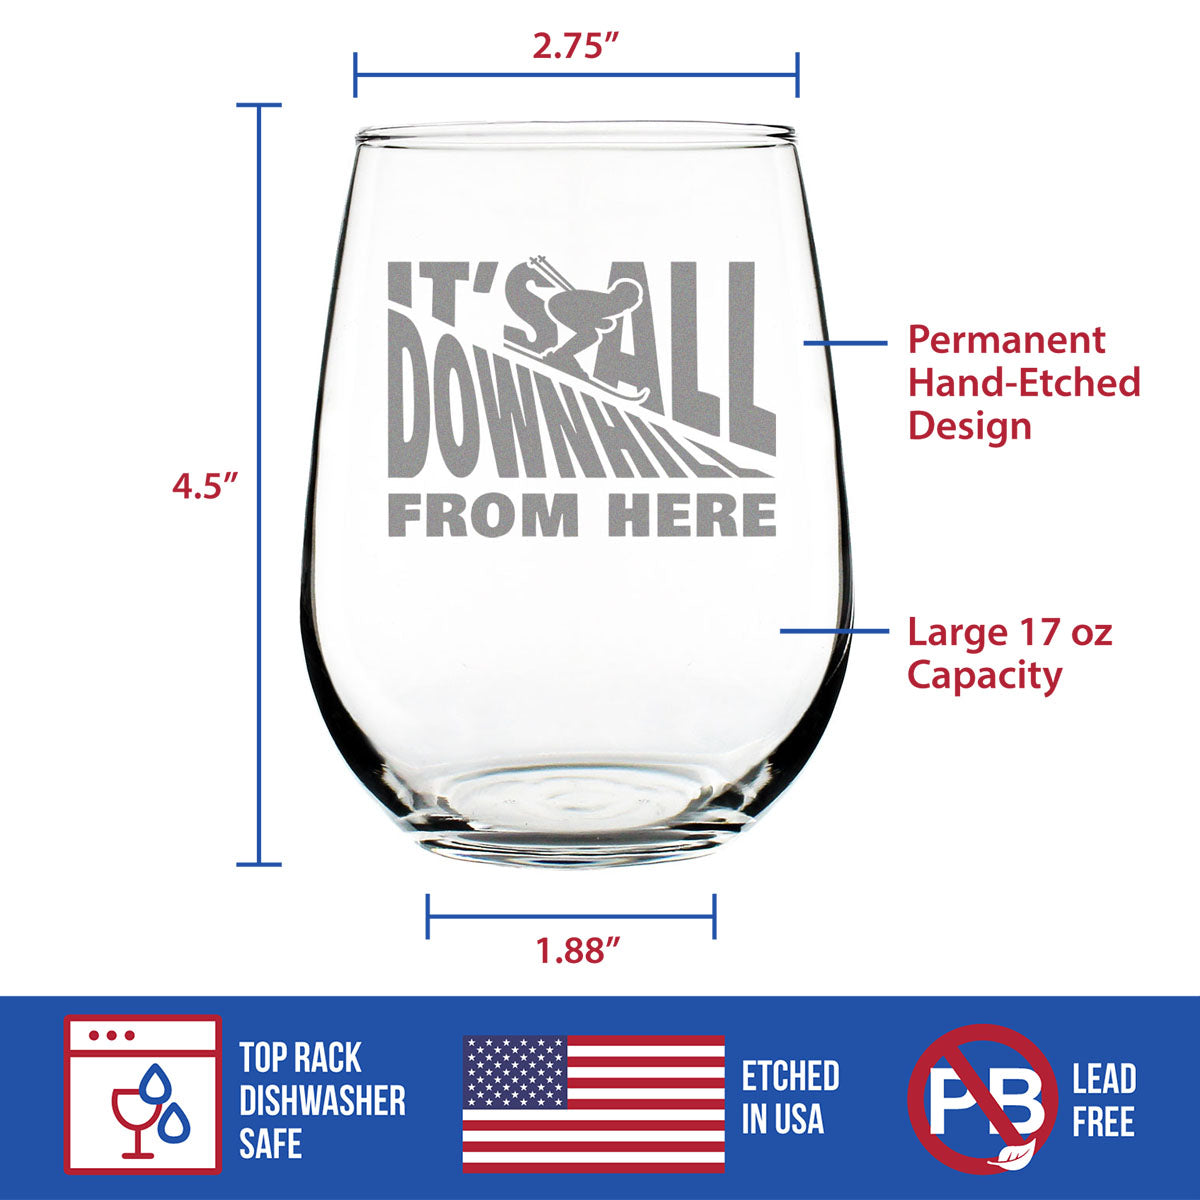 It&#39;s All Downhill From Here - Stemless Wine Glass - Unique Skiing Themed Decor and Gifts for Mountain Lovers - Large 17 Oz Glasses